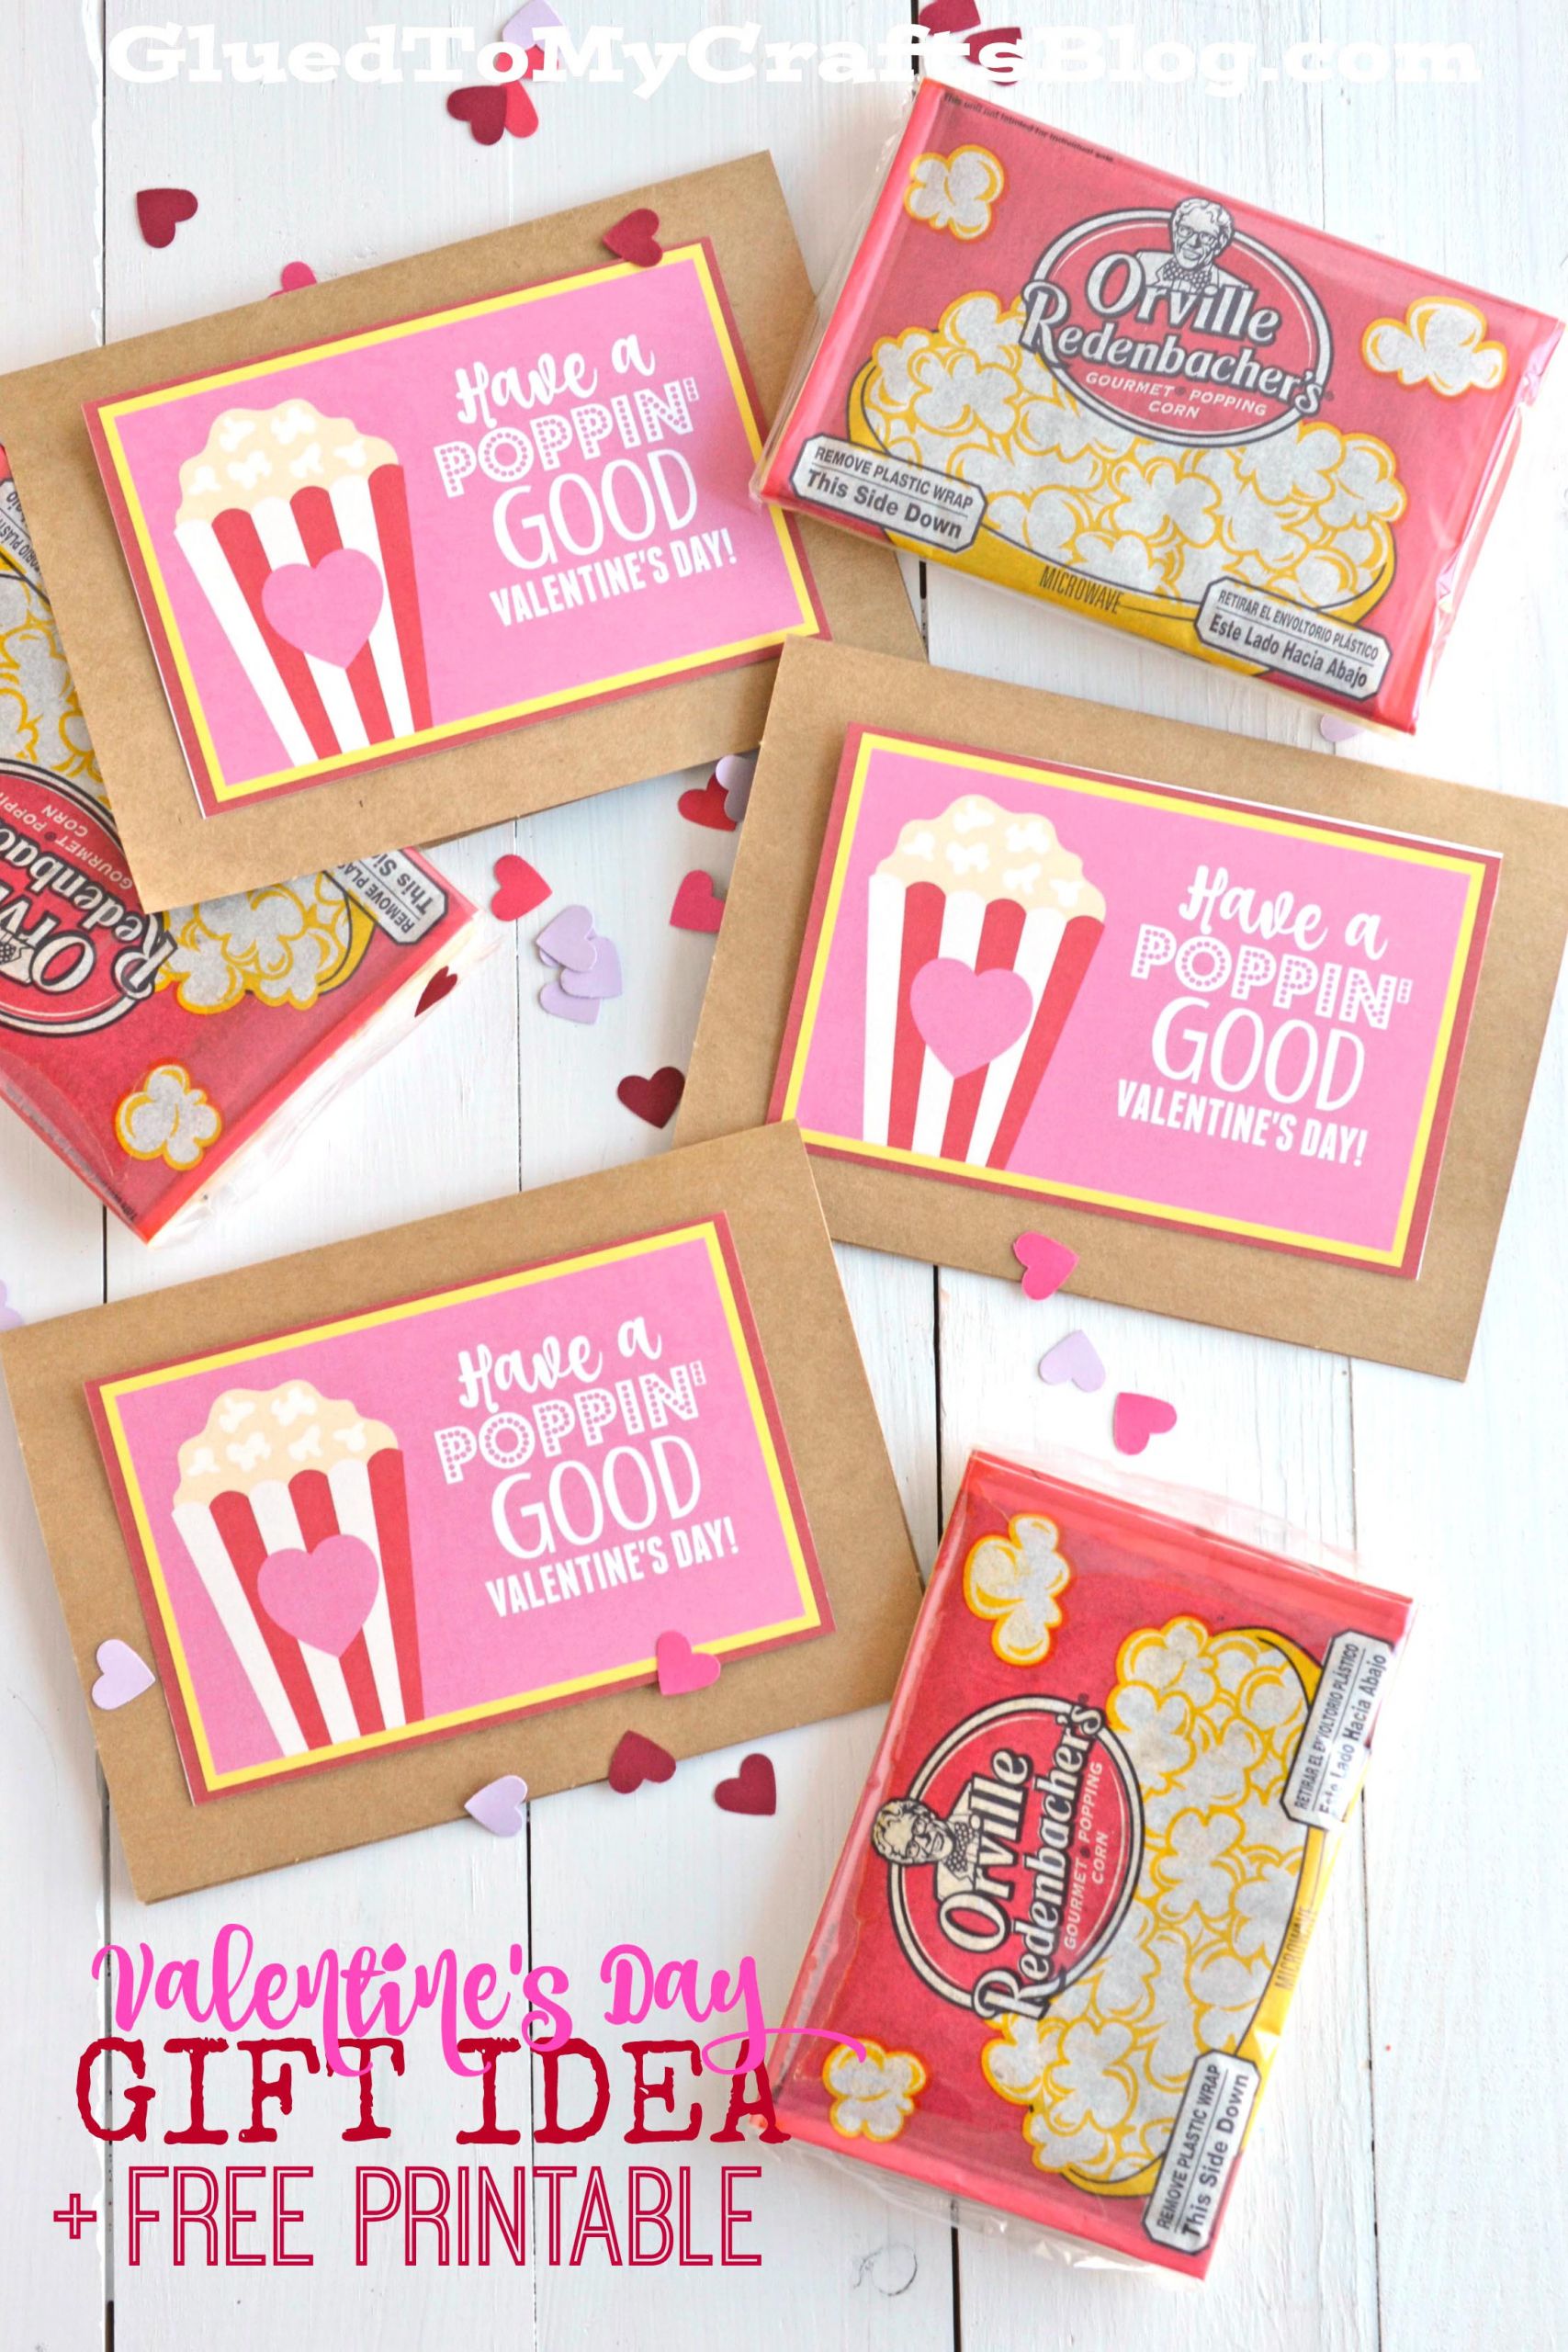 Valentine'S Day Gift Card Ideas
 Poppin Good Valentine s Day Gift Idea w free printable